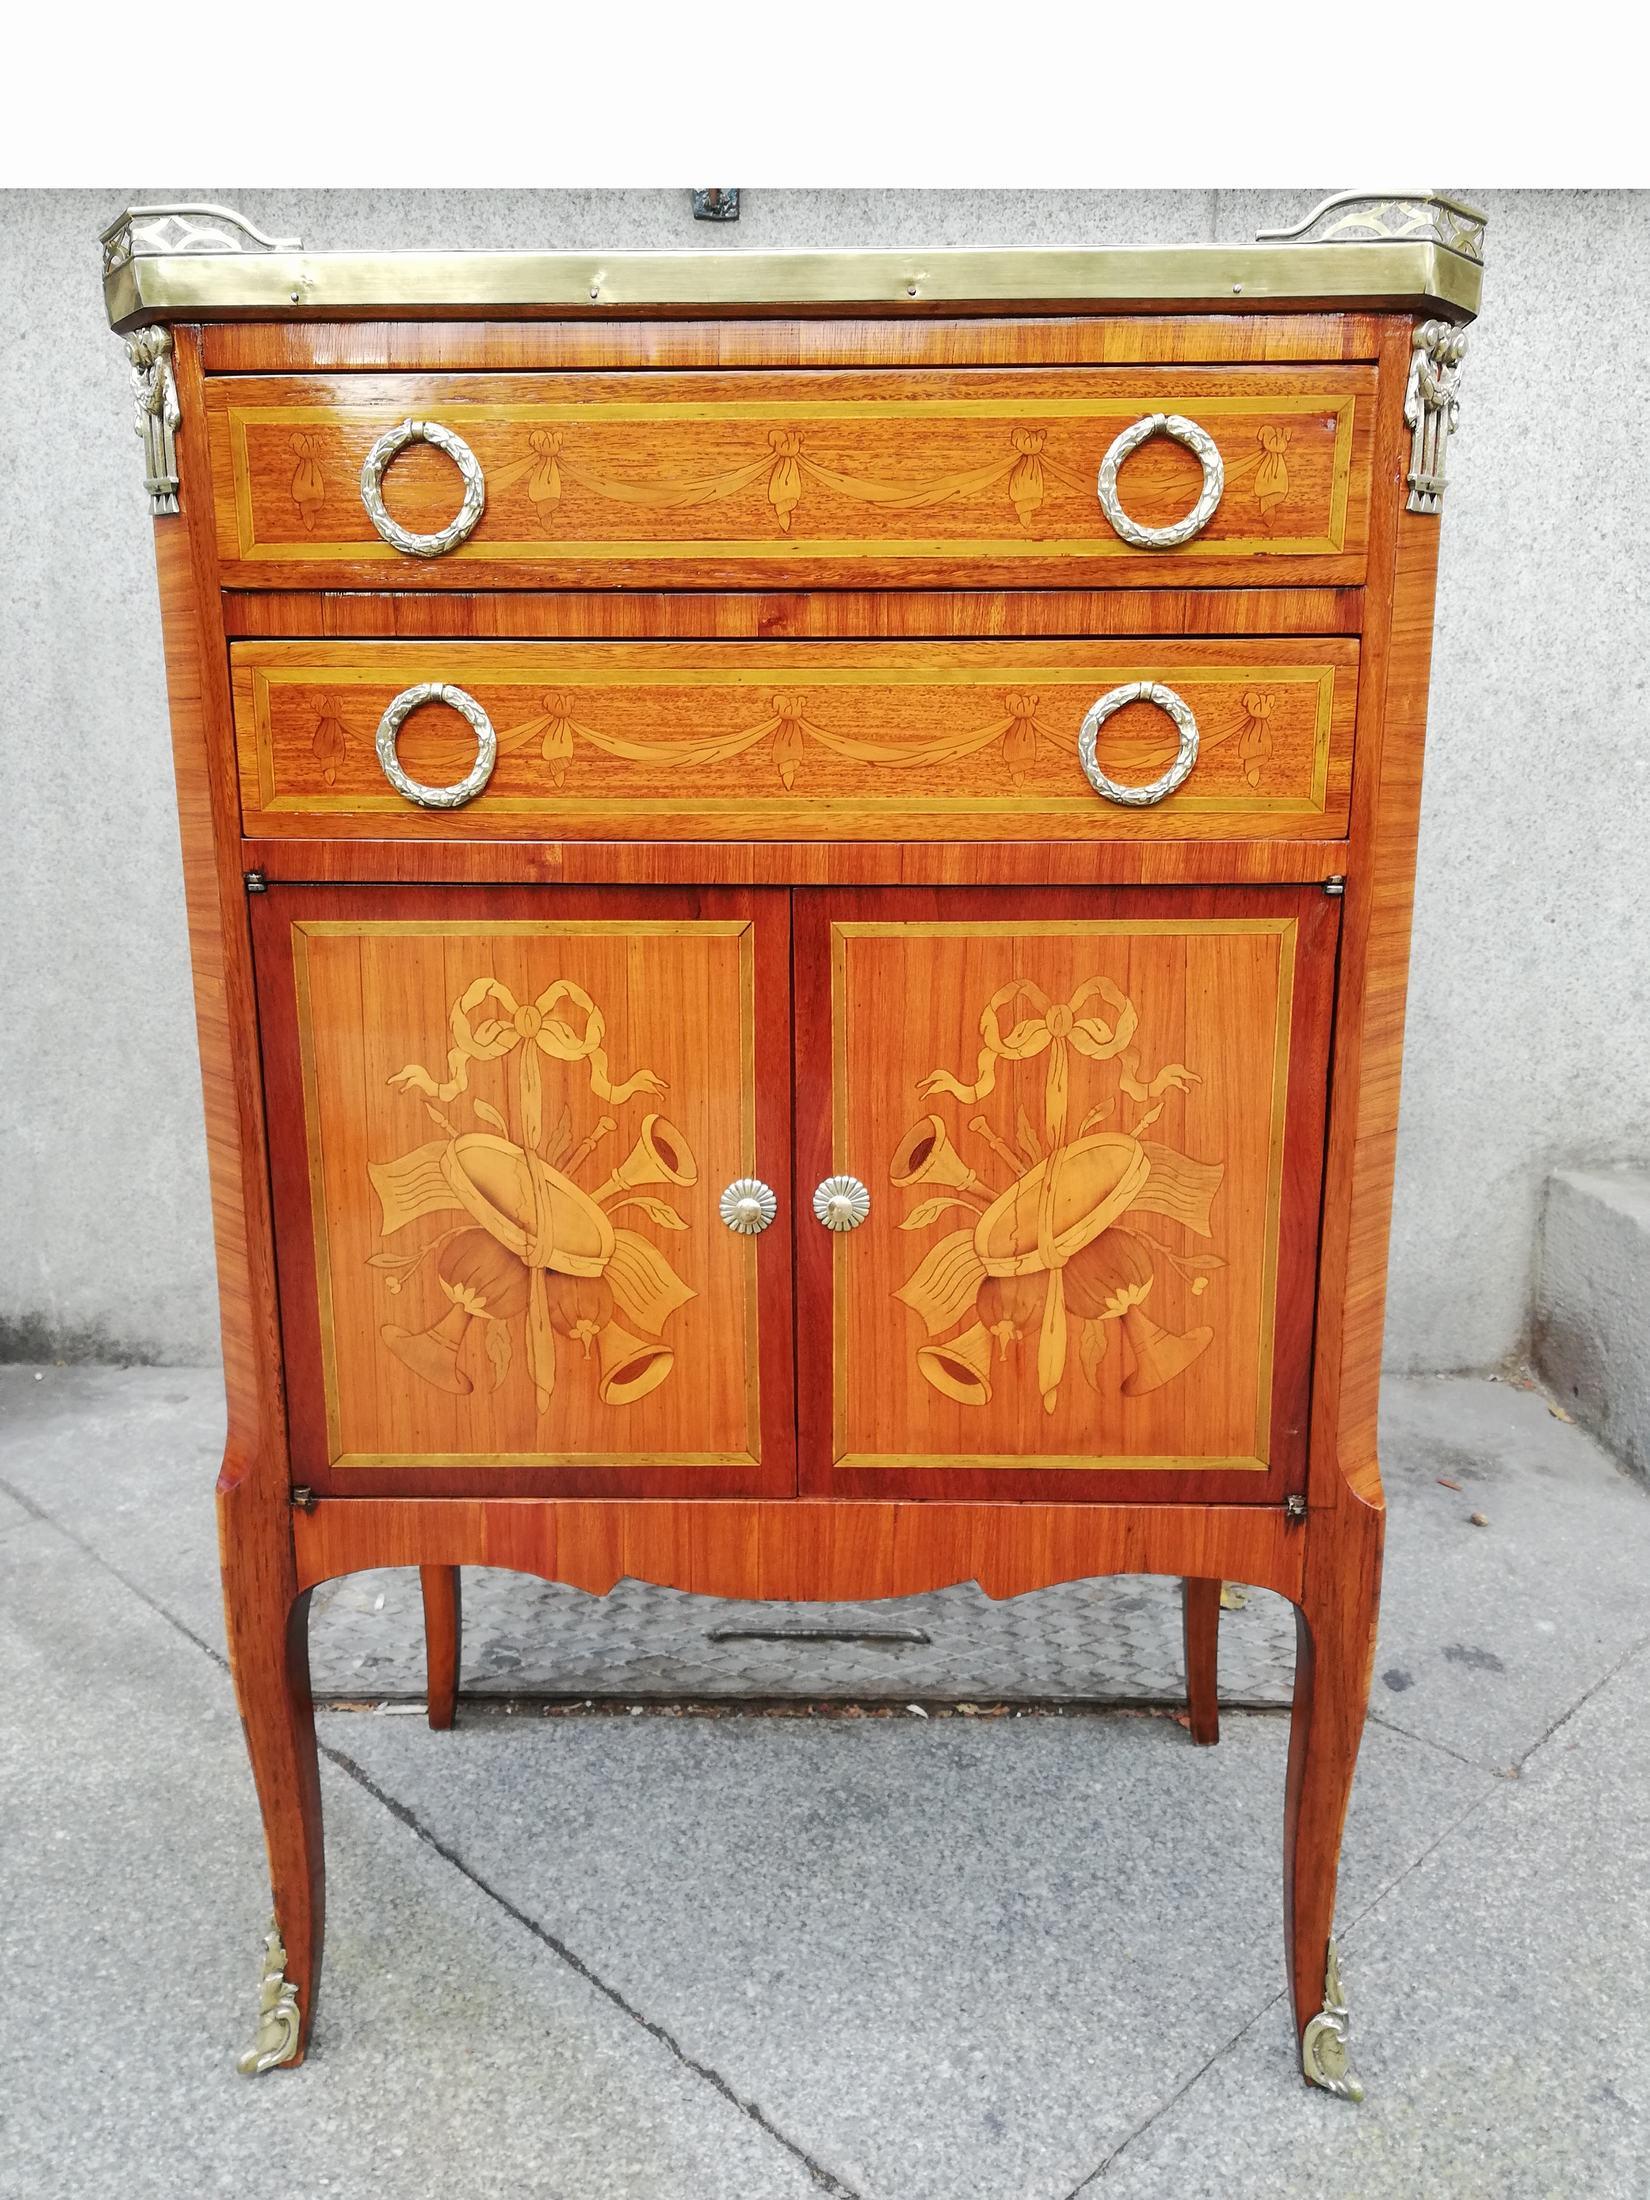 Small commode furniture end 19th century
Good condition
Measures: 83 x 54 x 32 cm.